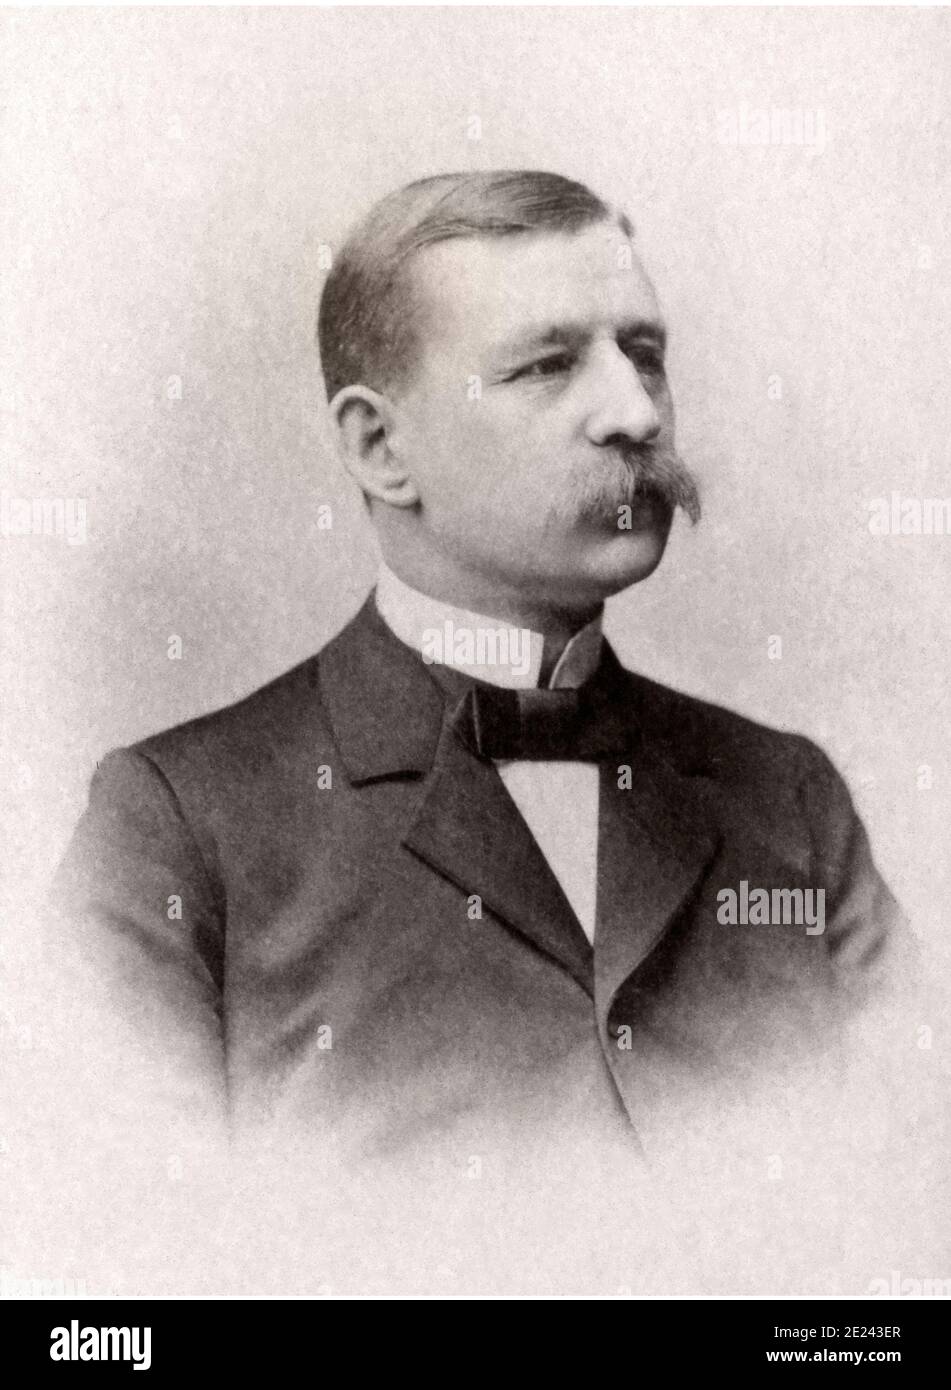 Salomon August Andrée (1854 – 1897) was a Swedish engineer, physicist, aeronaut and polar explorer who died while leading an attempt to reach the Geog Stock Photo